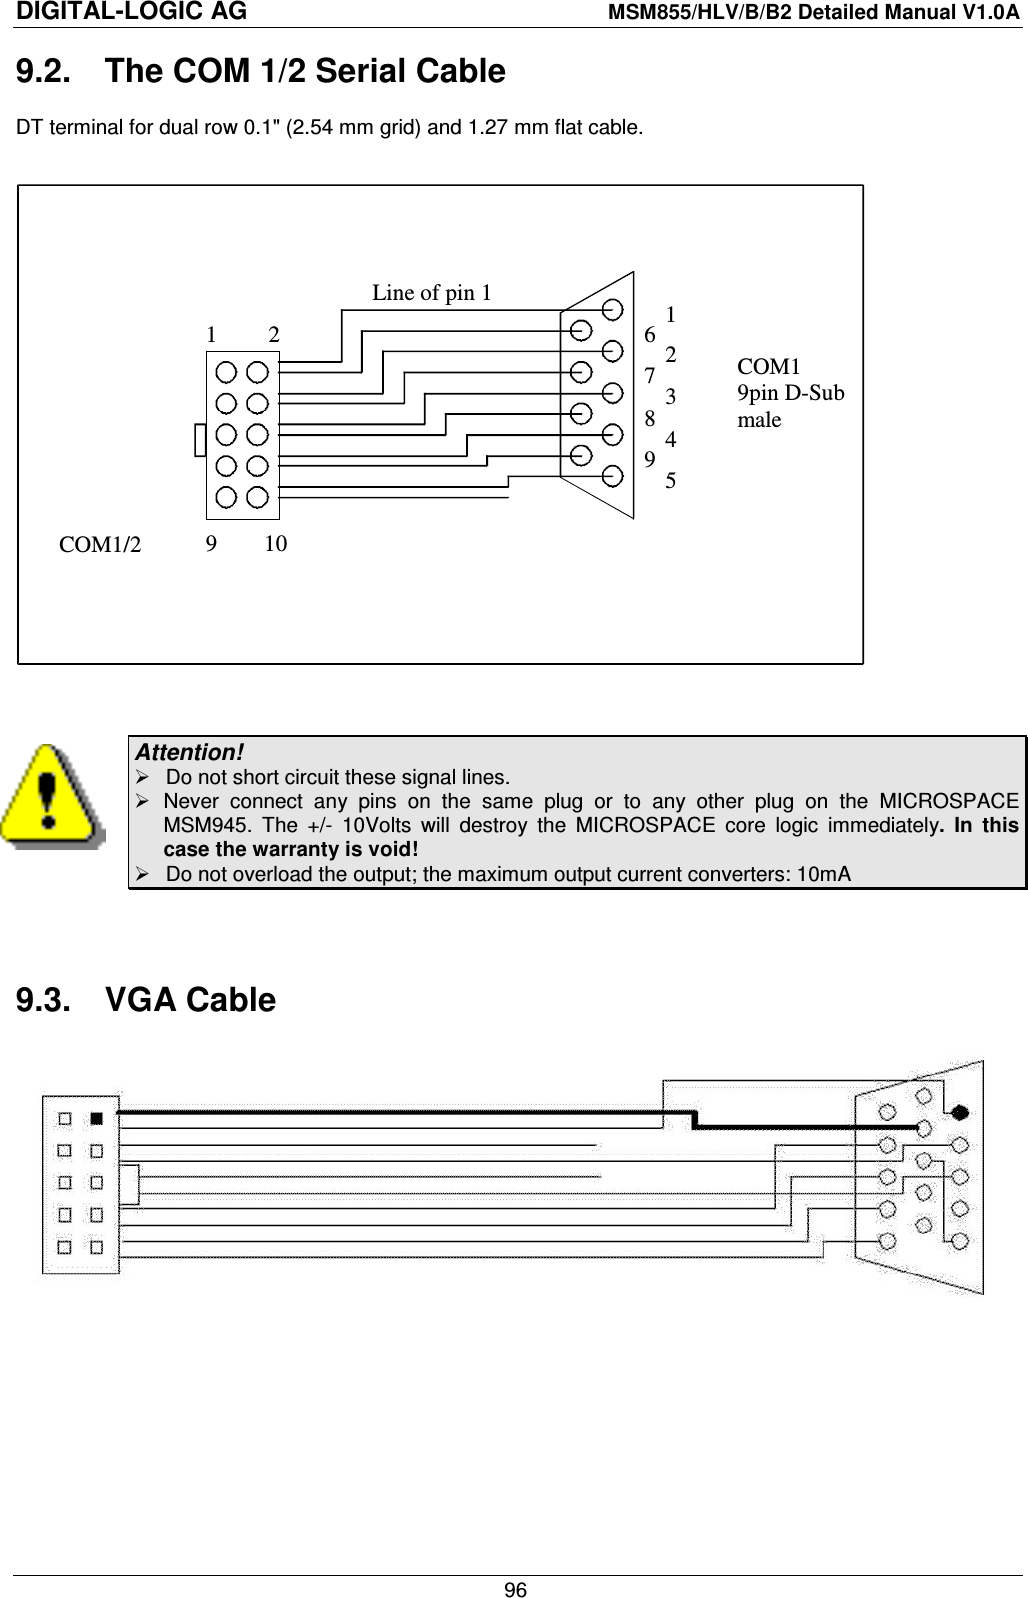 DIGITAL-LOGIC AG    MSM855/HLV/B/B2 Detailed Manual V1.0A    96 9.2.  The COM 1/2 Serial Cable DT terminal for dual row 0.1&quot; (2.54 mm grid) and 1.27 mm flat cable.   2 1 COM1 9pin D-Sub male   COM1/2 1 6  2 3 4 5 7 8 9 Line of pin 1 9        10   Attention!   Do not short circuit these signal lines.   Never  connect  any  pins  on  the  same  plug  or  to  any  other  plug  on  the  MICROSPACE MSM945.  The  +/-  10Volts  will  destroy  the  MICROSPACE  core  logic  immediately.  In  this case the warranty is void!   Do not overload the output; the maximum output current converters: 10mA   9.3.  VGA Cable    